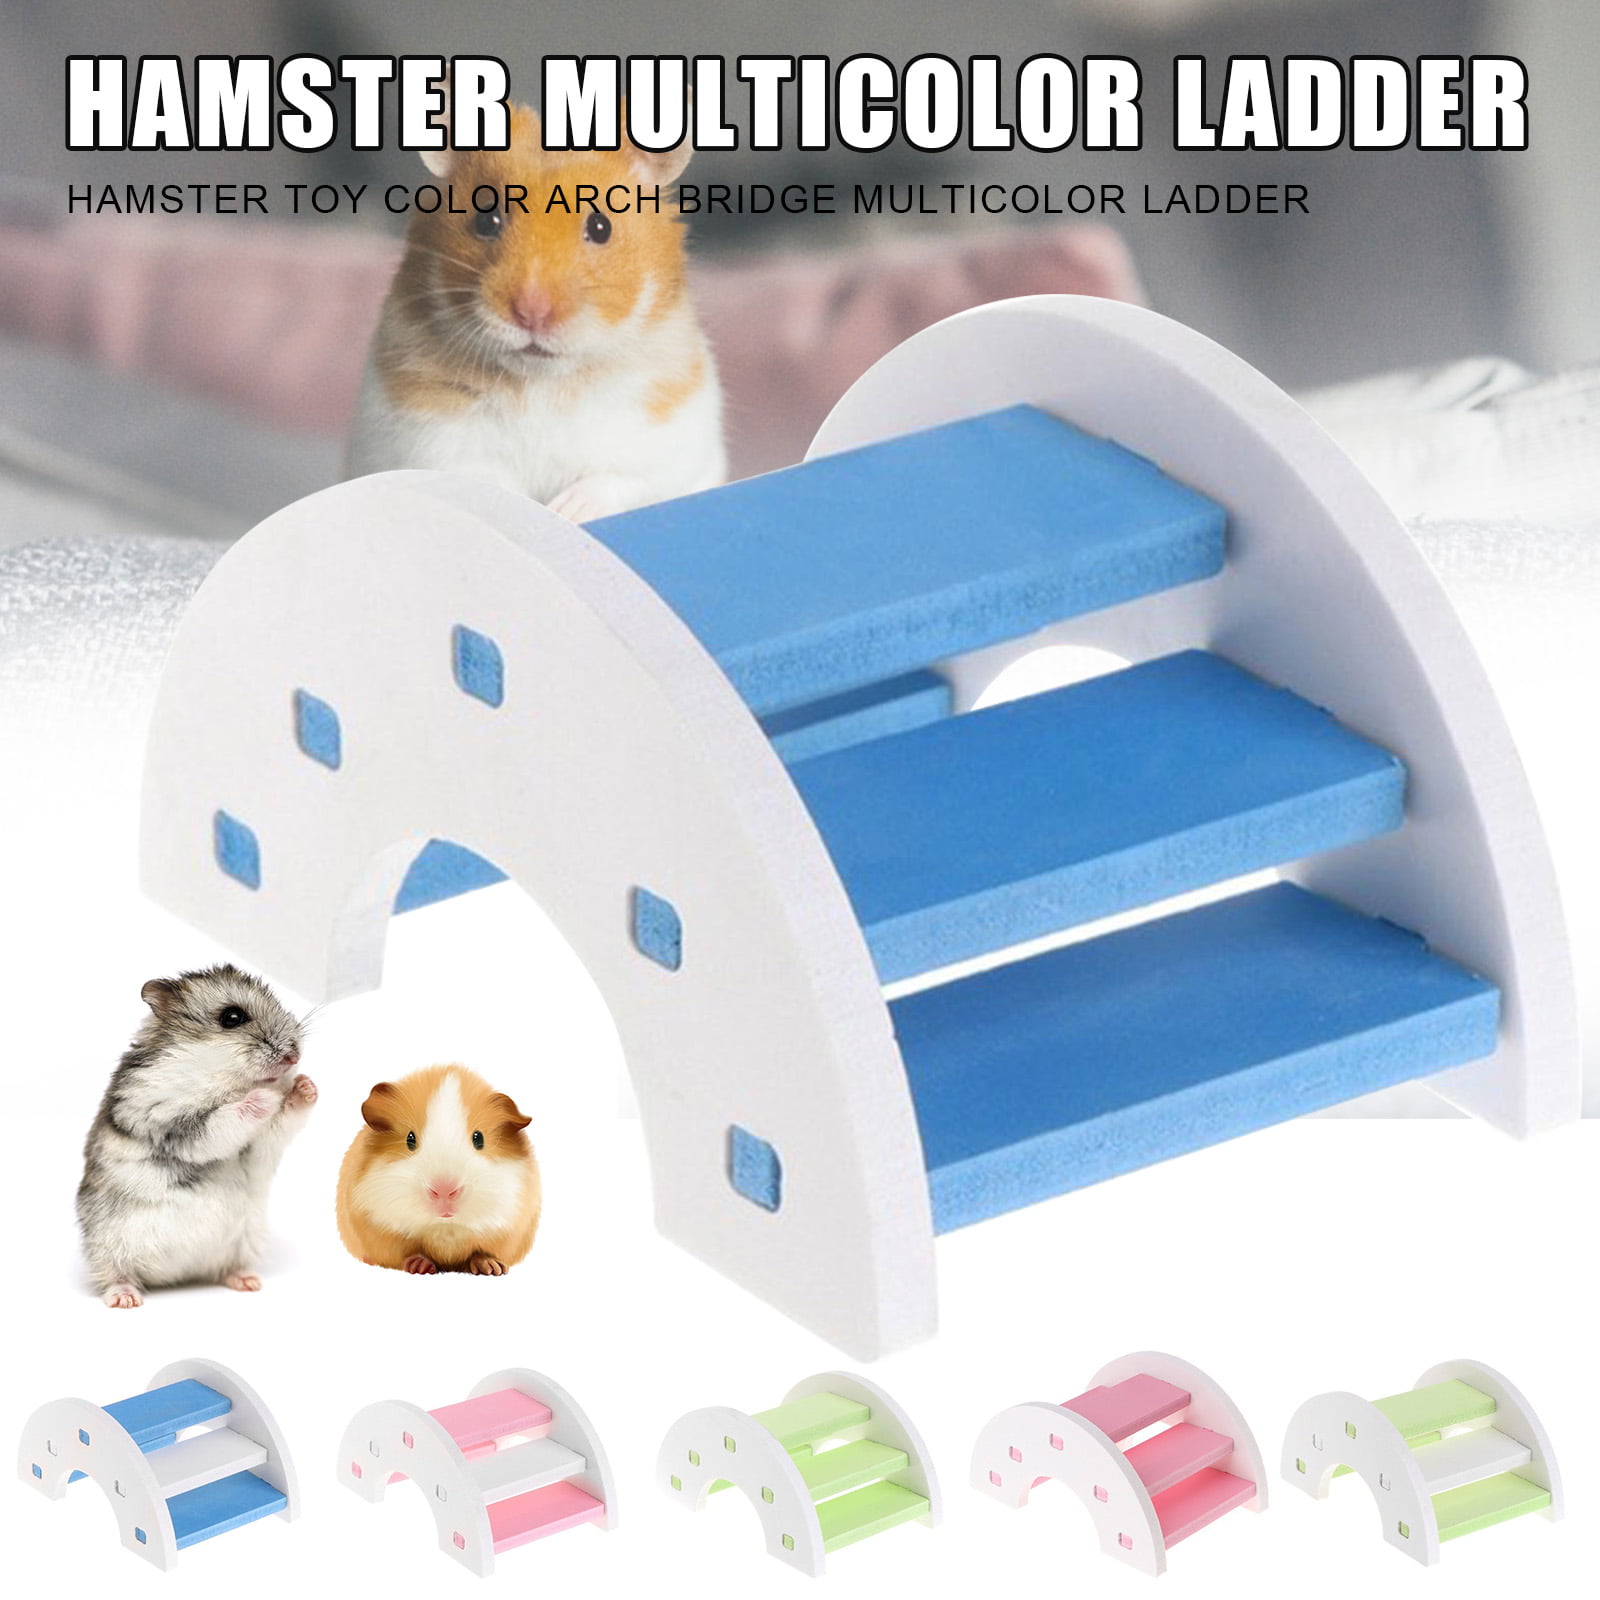 POPETPOP Hamster Wood Climbing Toy Rat Hideout Arch Bridge Mouse Ladder Platform Toys Hamster Entertainment Game for Guinea Pigs Small Animal 